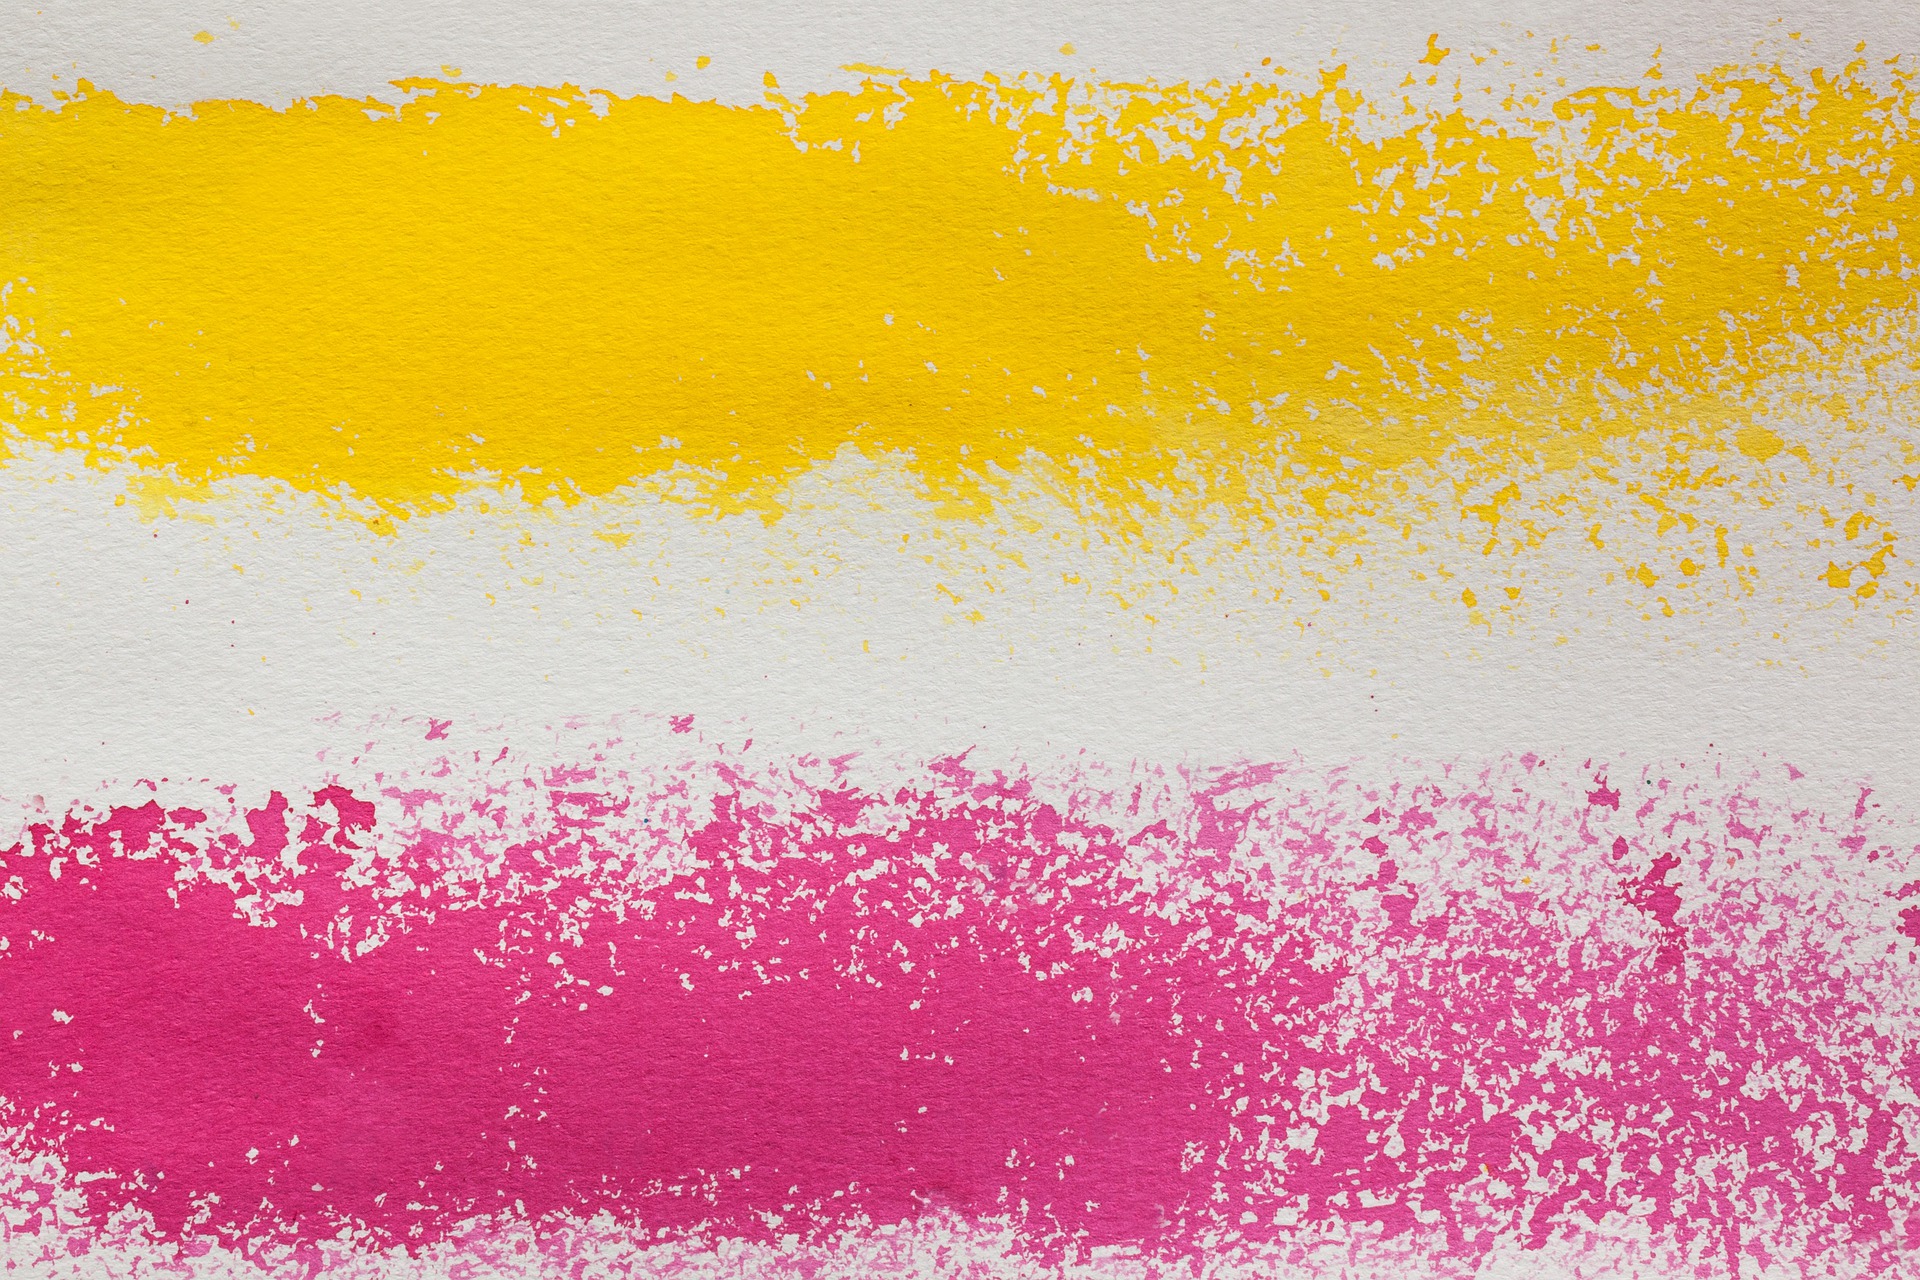 What Color Does Pink And Yellow Make?